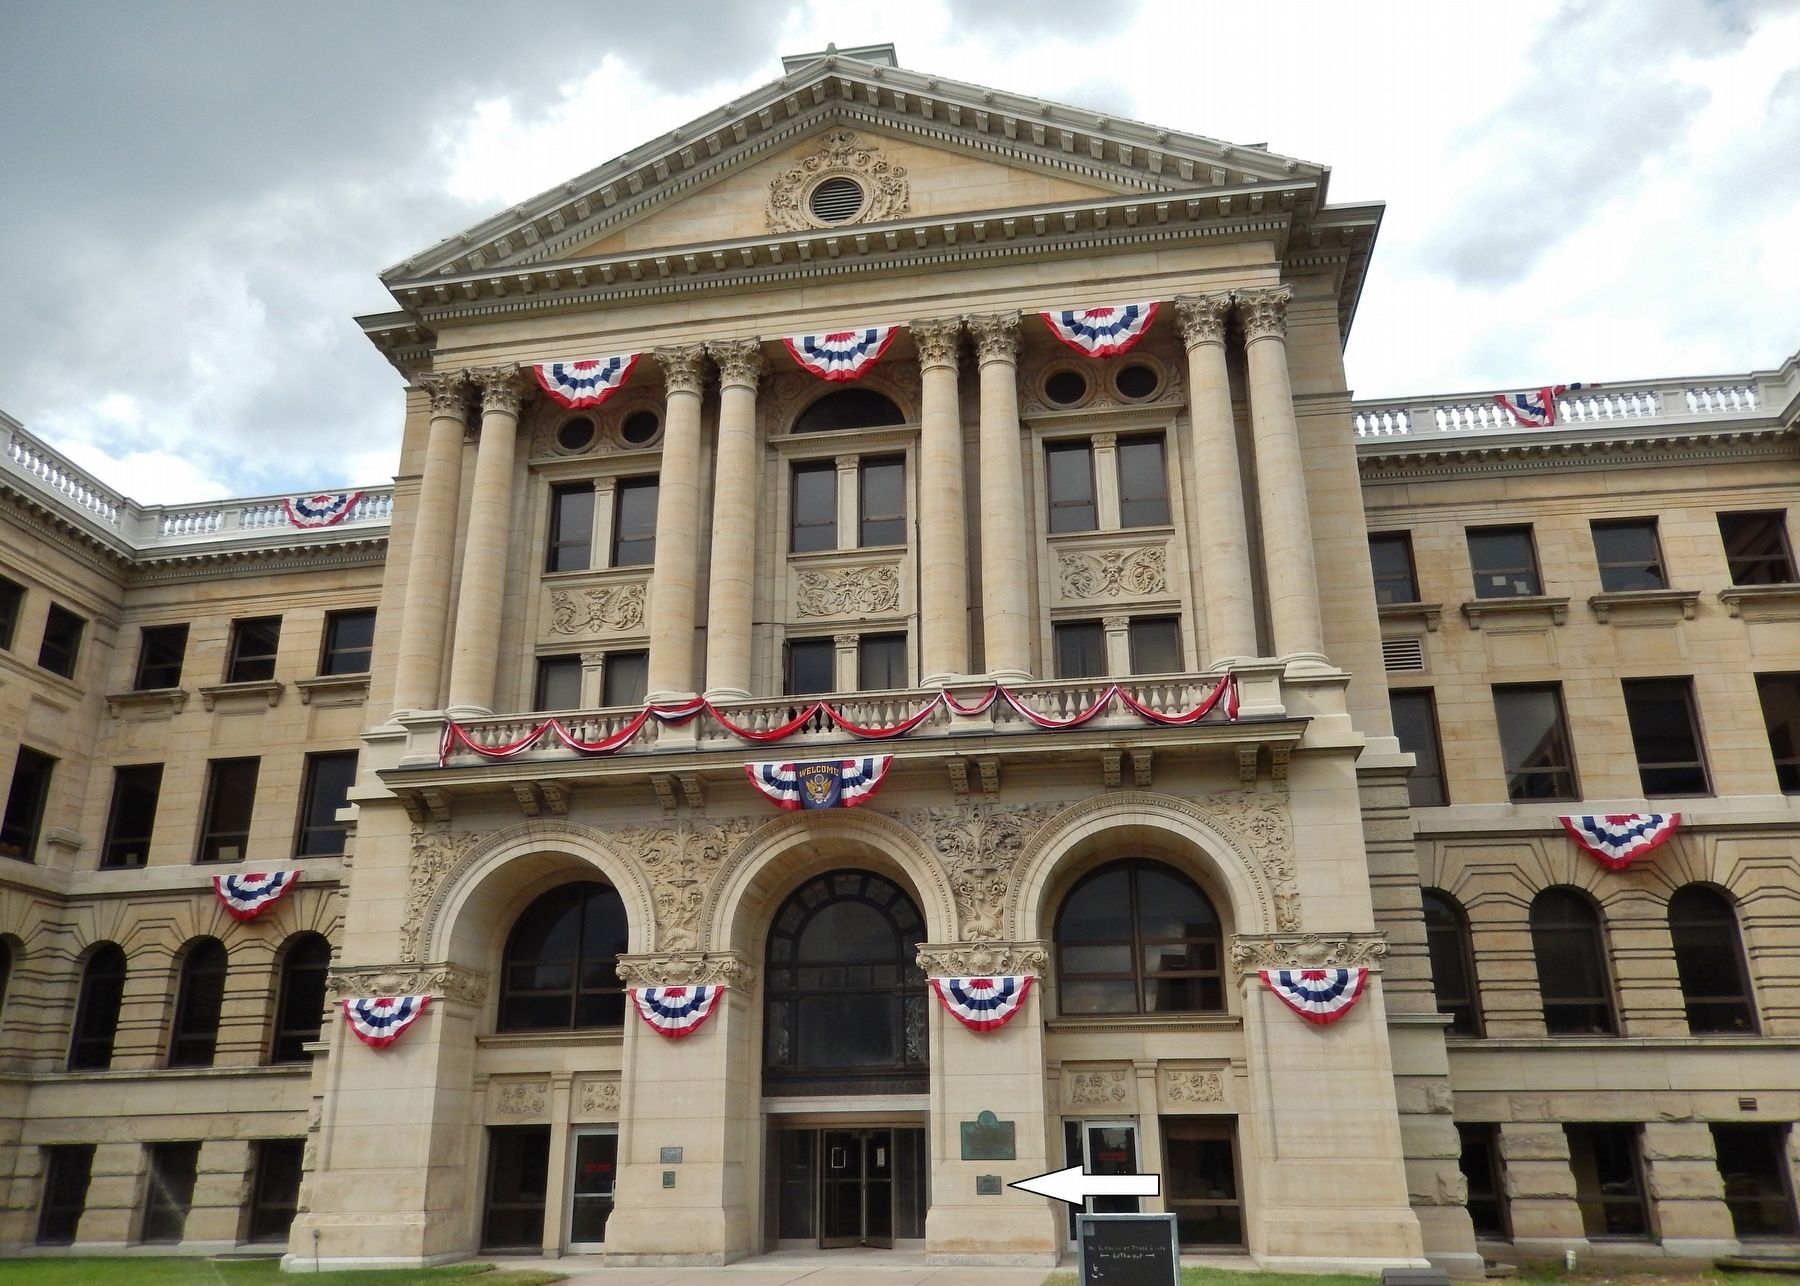 Lucas County Courthouse (<i>Main entrance on Adams Street; marker visible on pillar</i>) image. Click for full size.